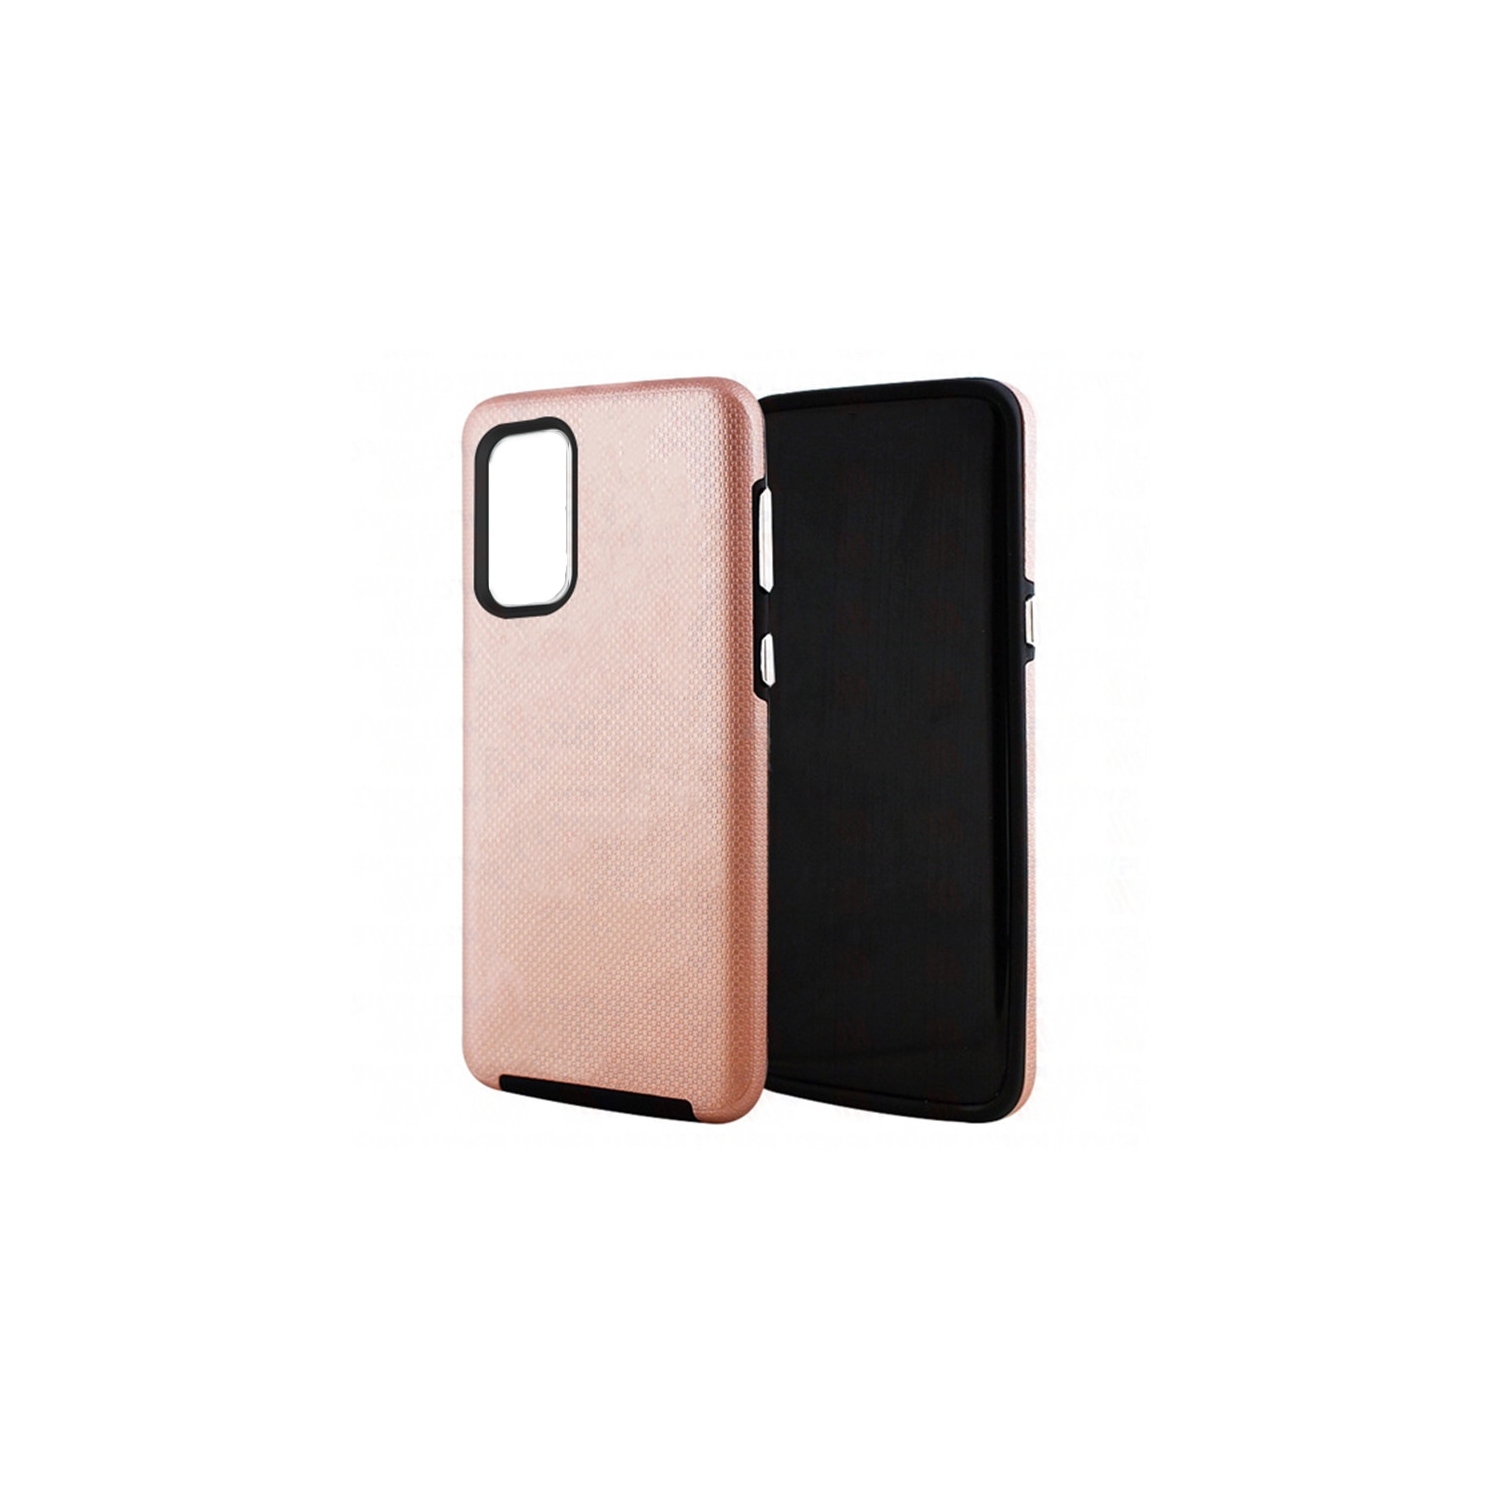 【CSmart】 Slim Fitted Hybrid Hard PC Shell Shockproof Scratch Resistant Case Cover for Samsung Galaxy A52 5G, Rose Gold